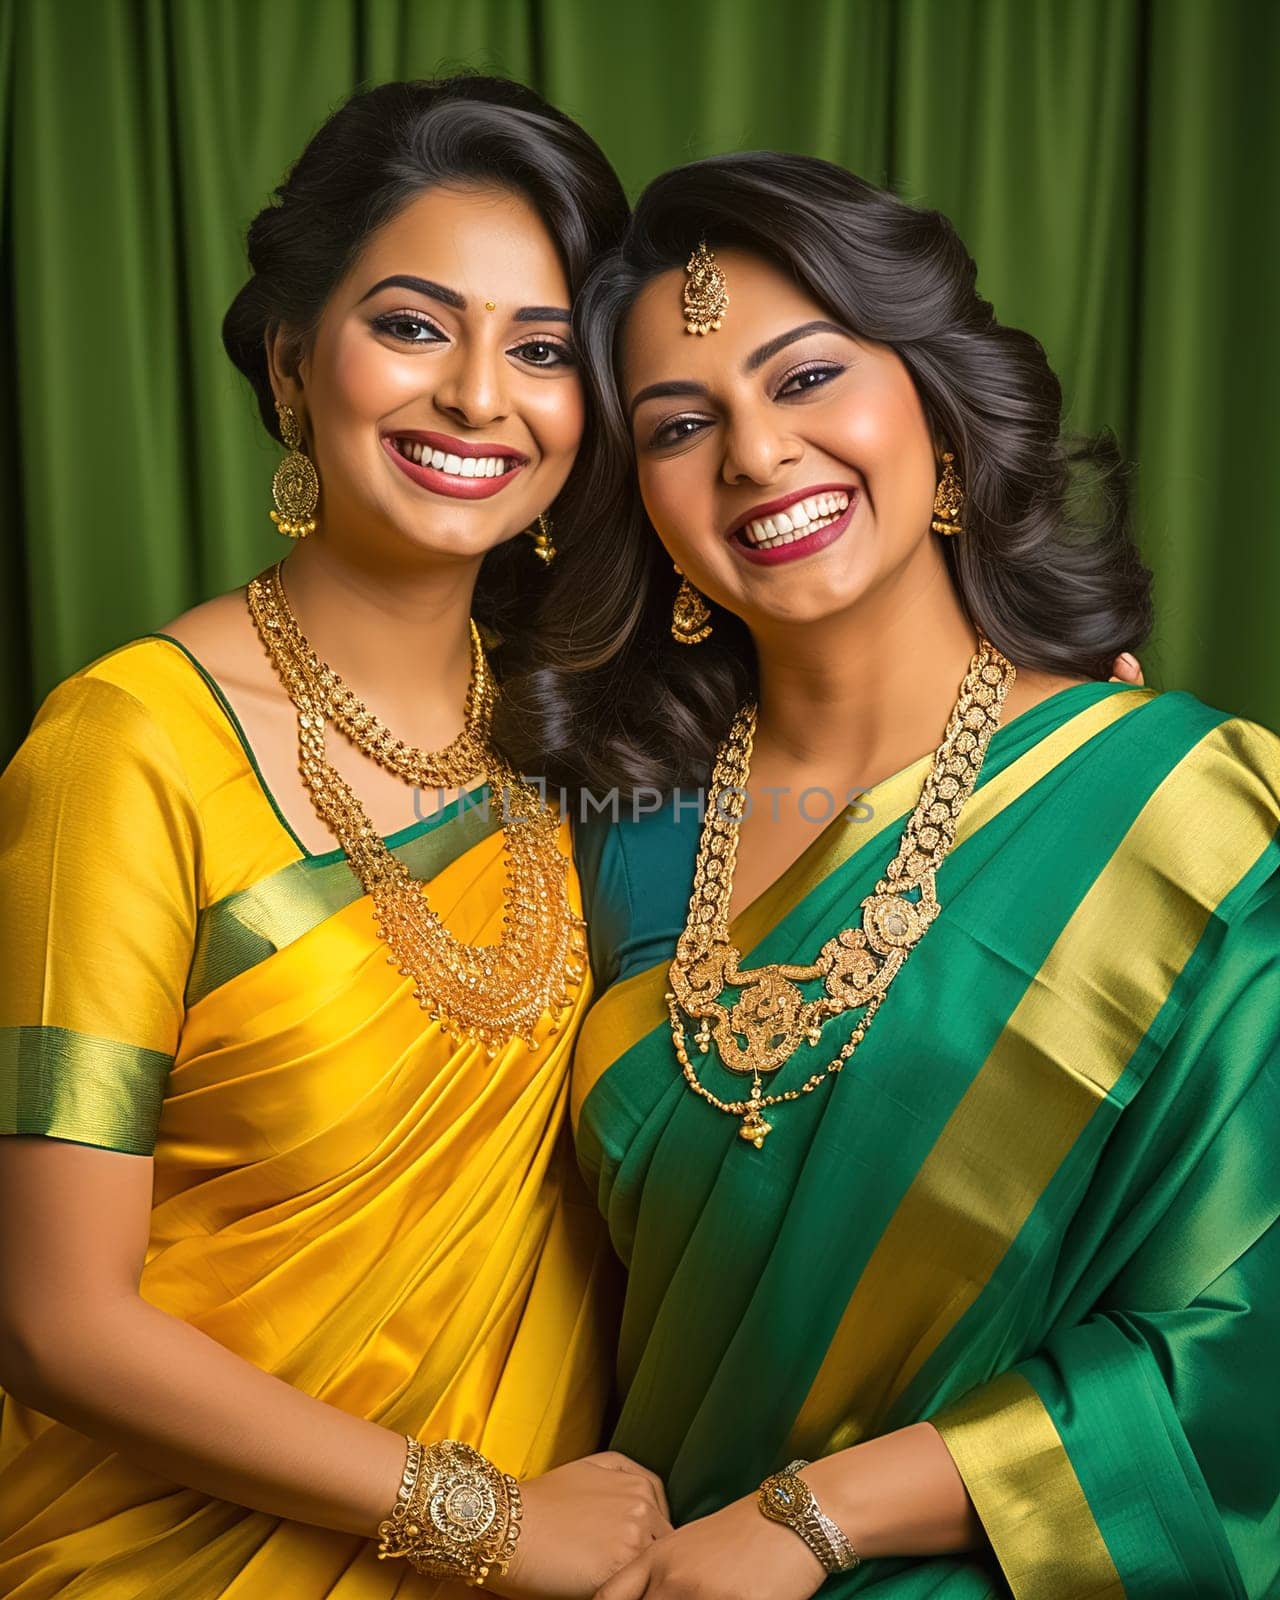 Portrait of two Indian women in yellow and green sari with jewelry